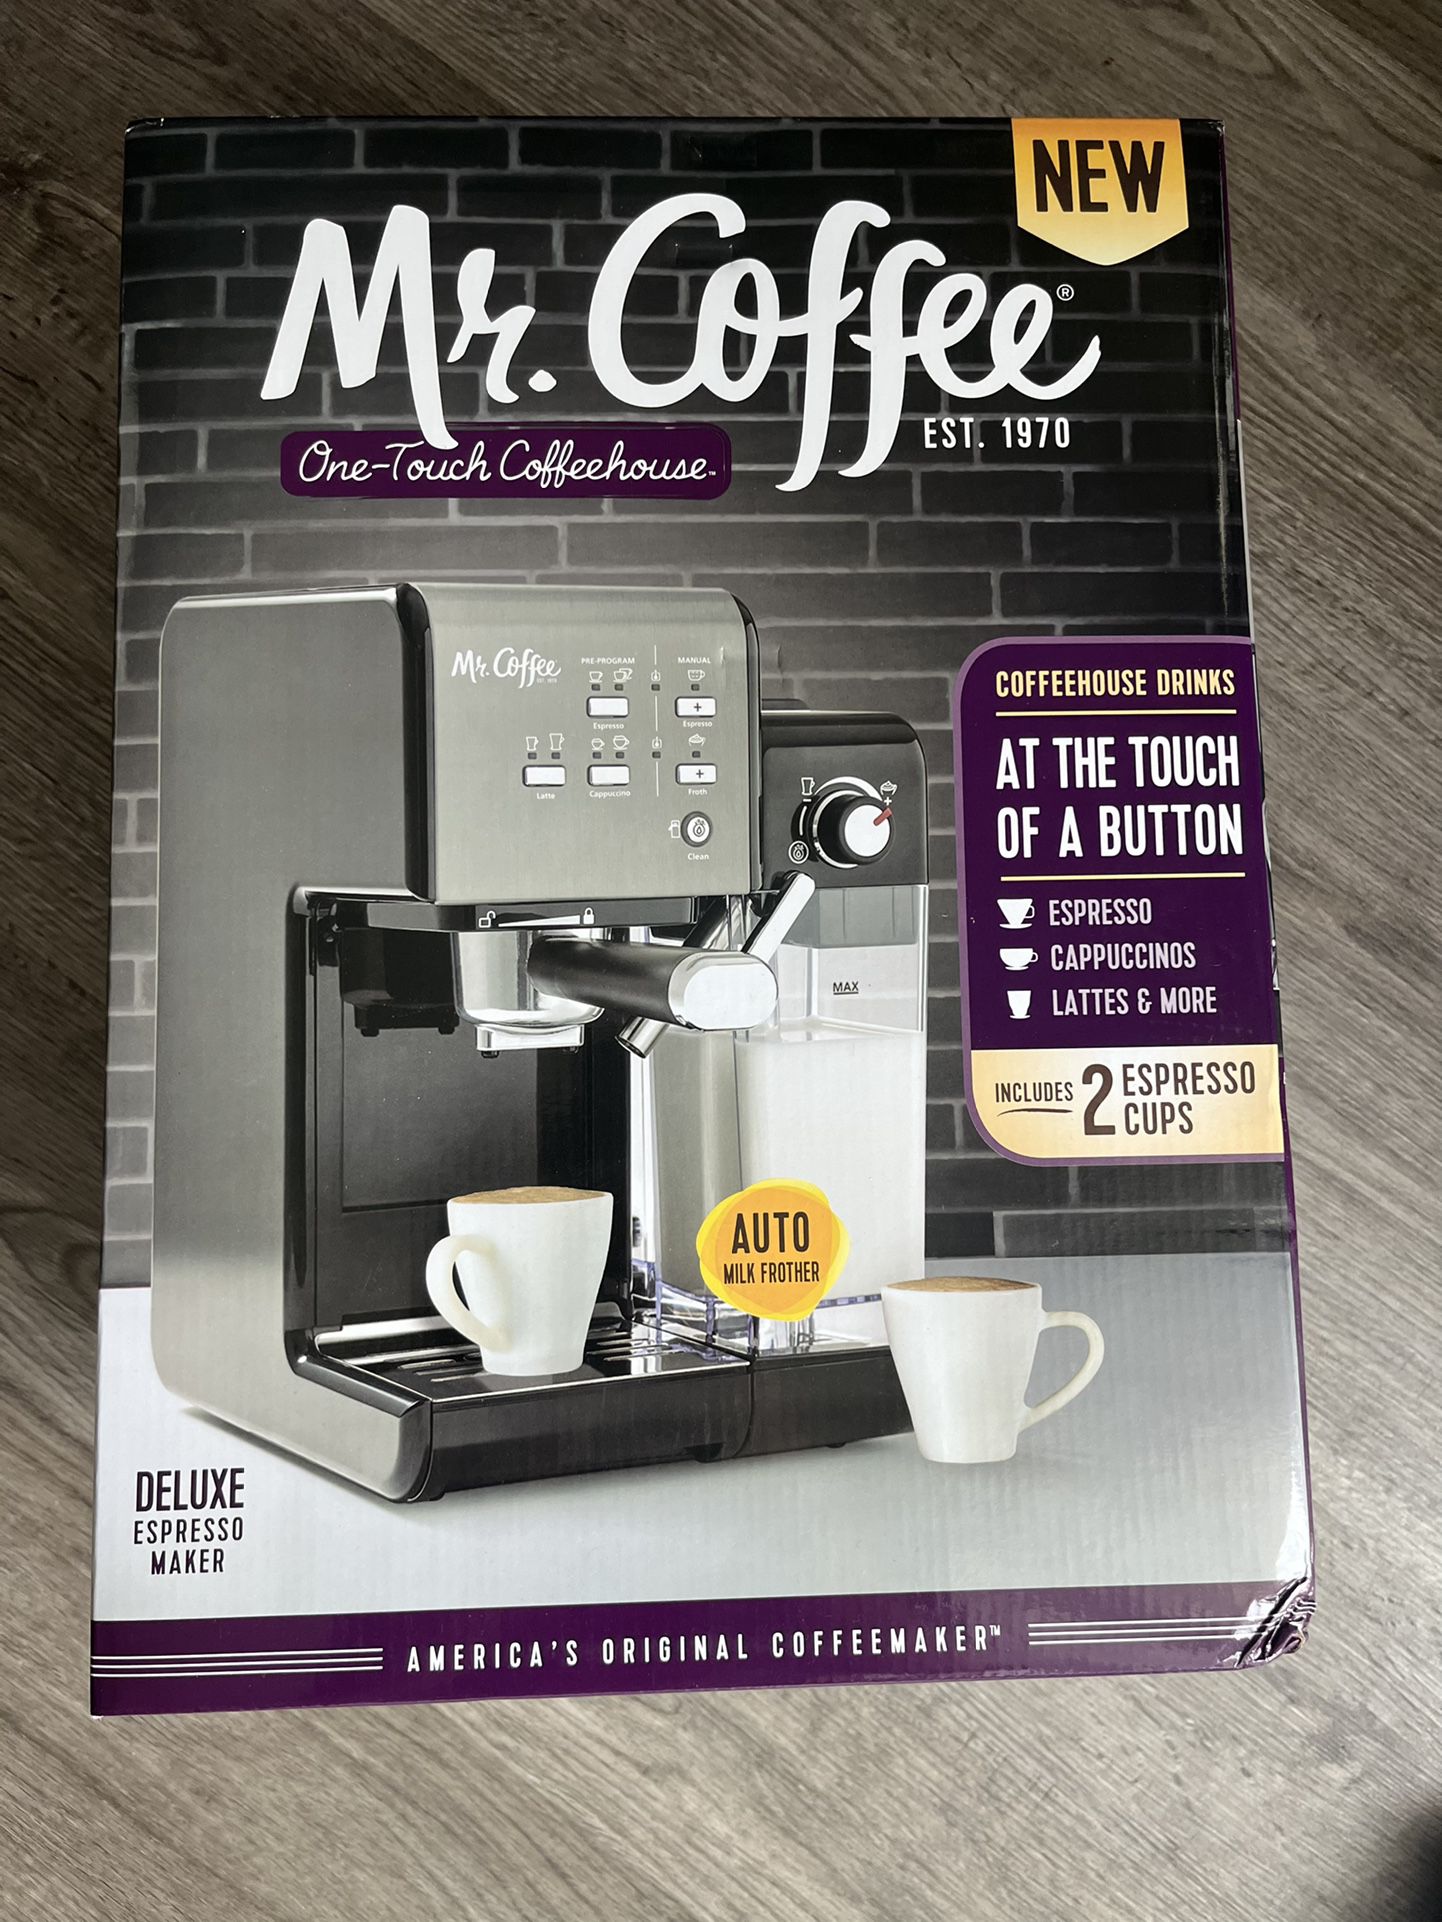  Mr. Coffee One-Touch Coffee House Espresso and